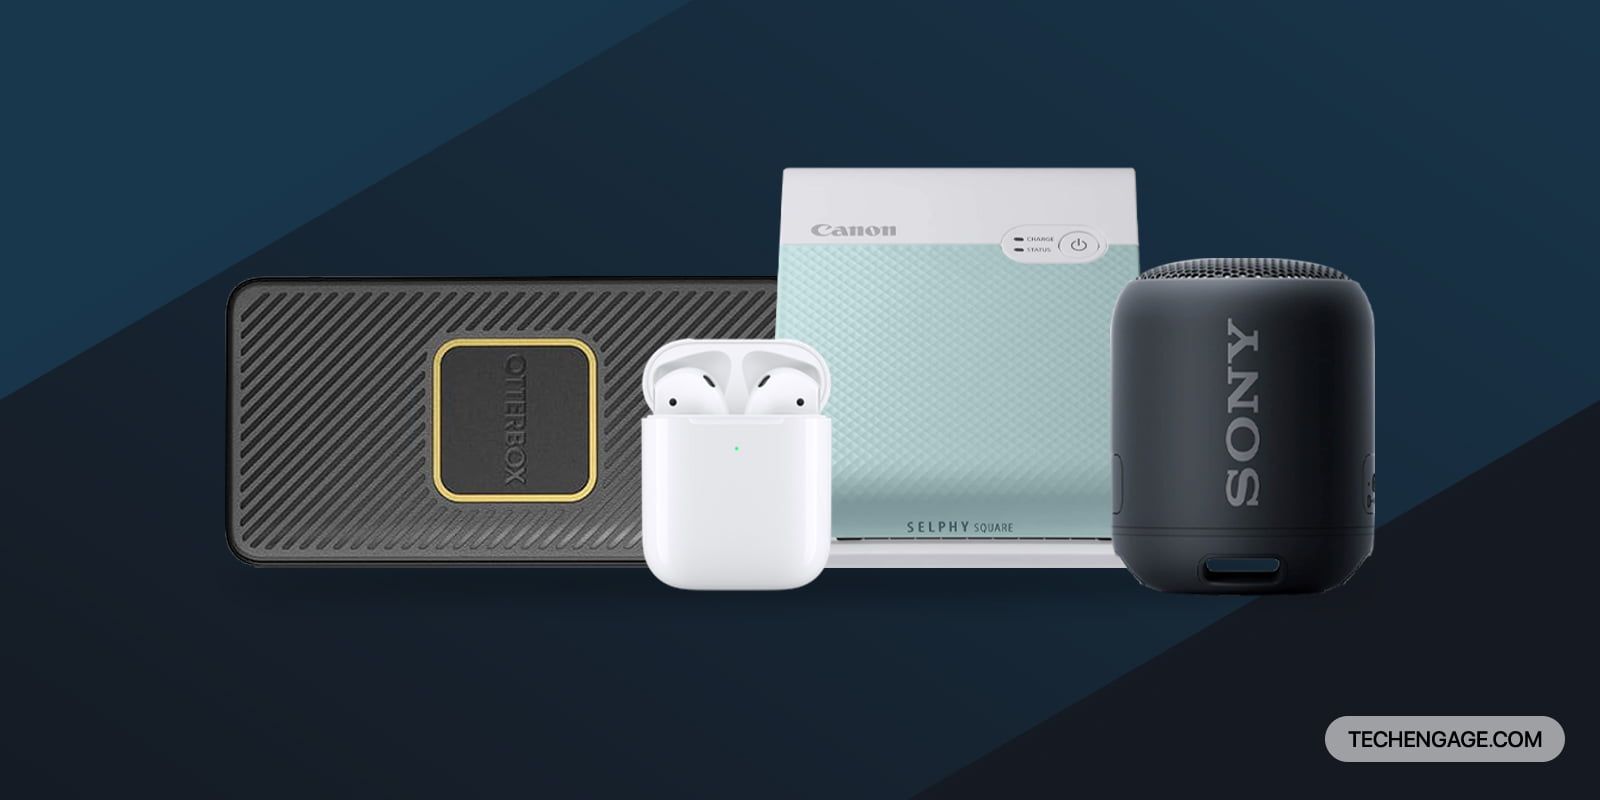 Top Tech Gifts For Your Tech-Savvy Friends